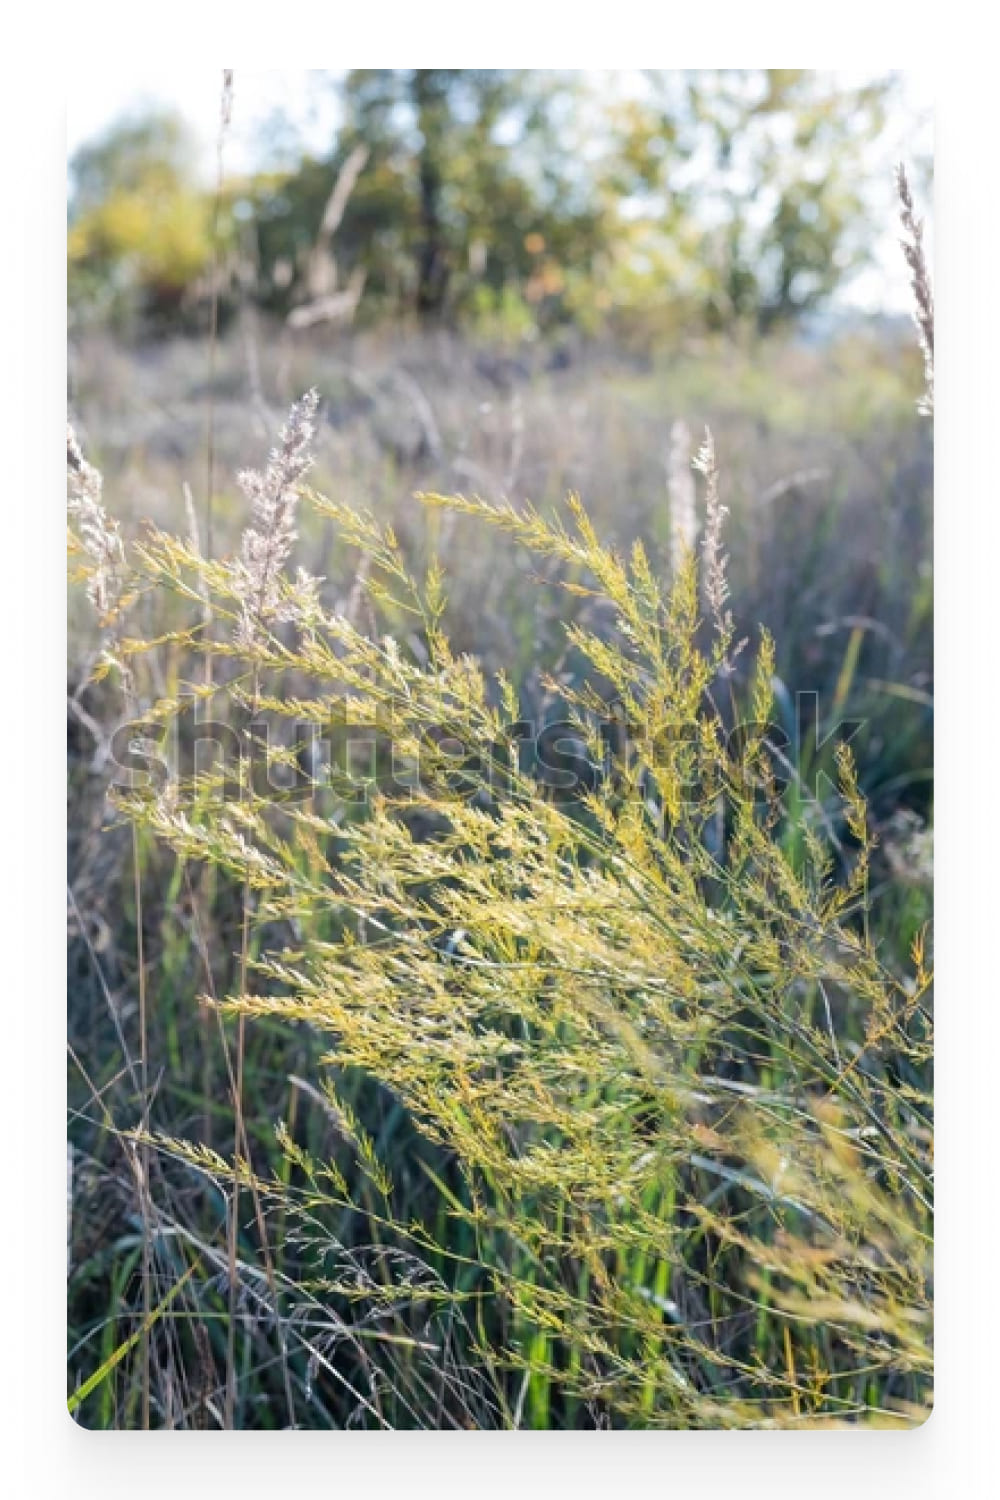 Photo of field grasses in a meadow.